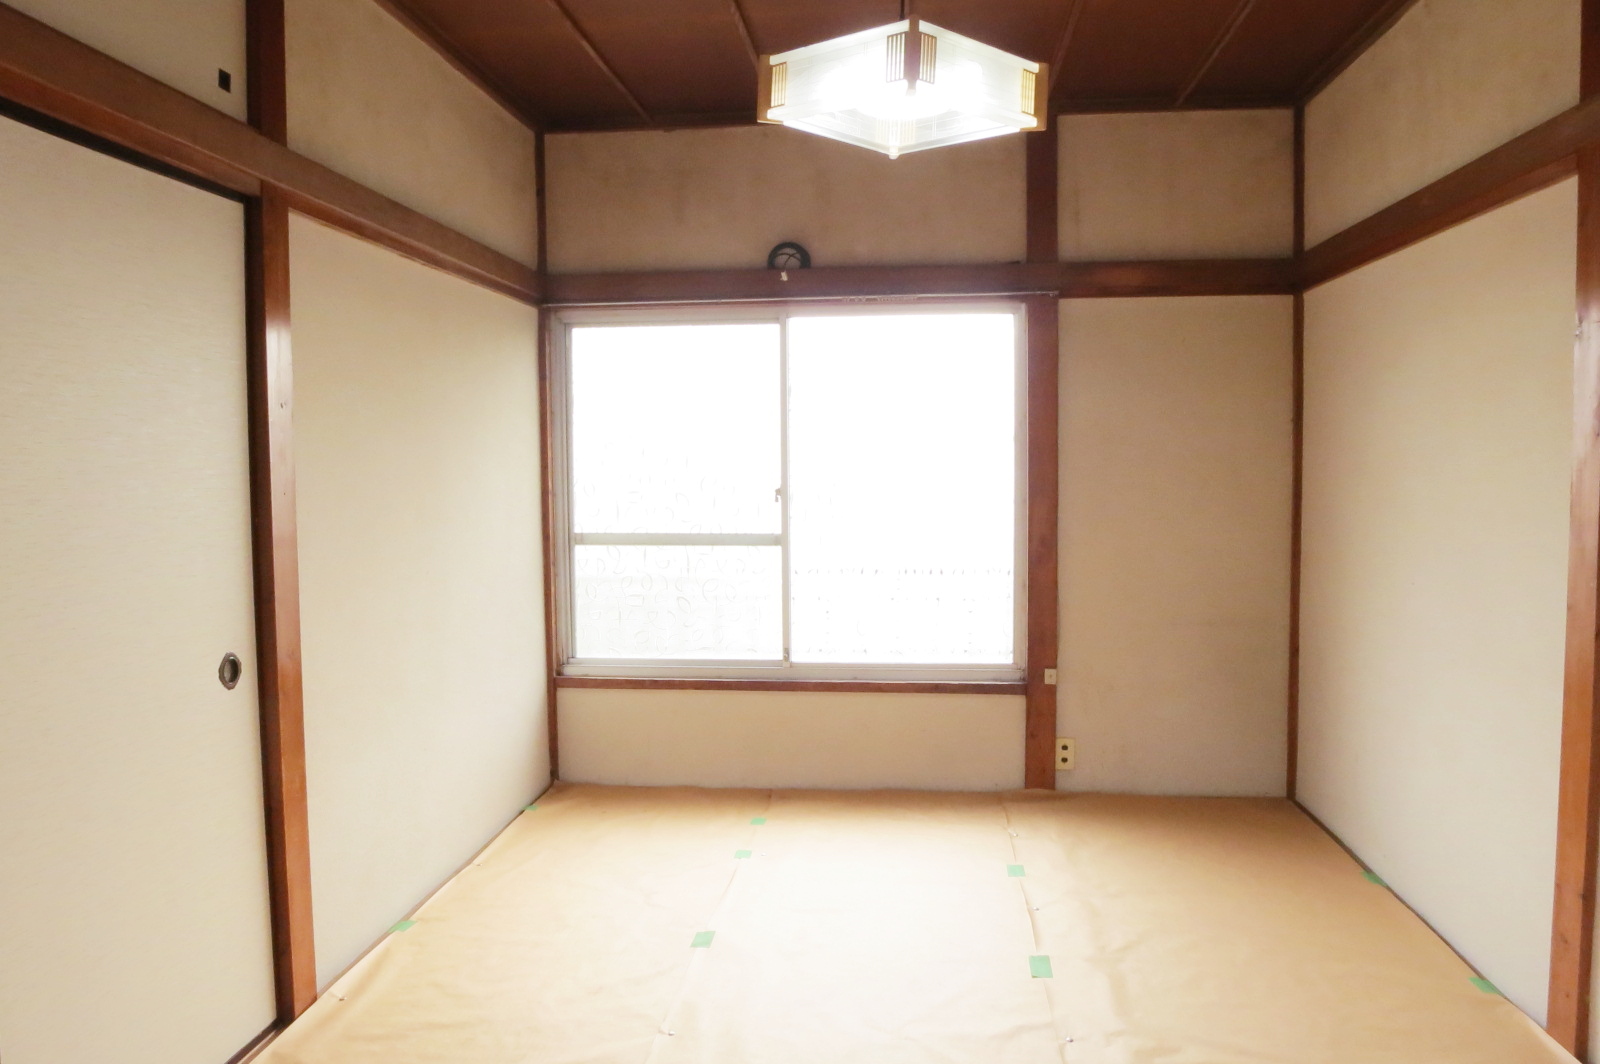 Living and room. 6-mat Japanese-style room